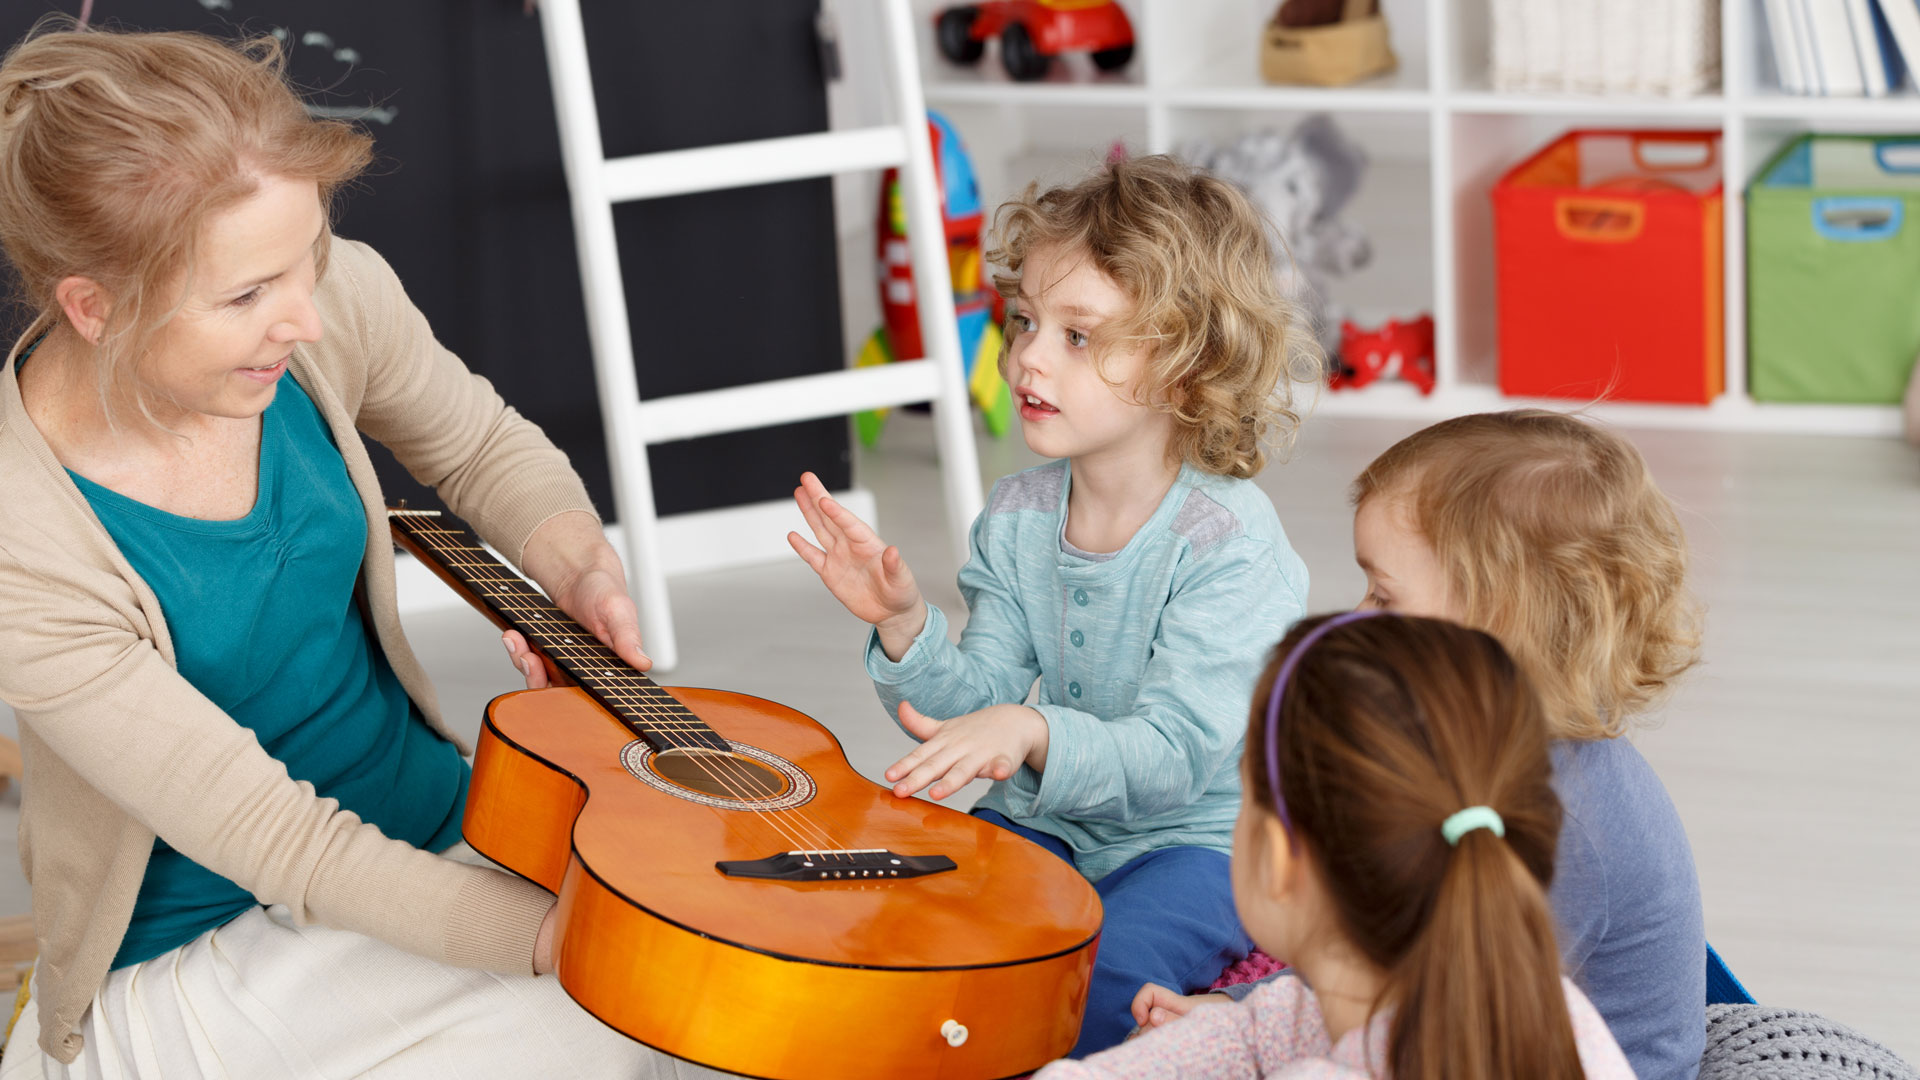 children learning how to play guitar